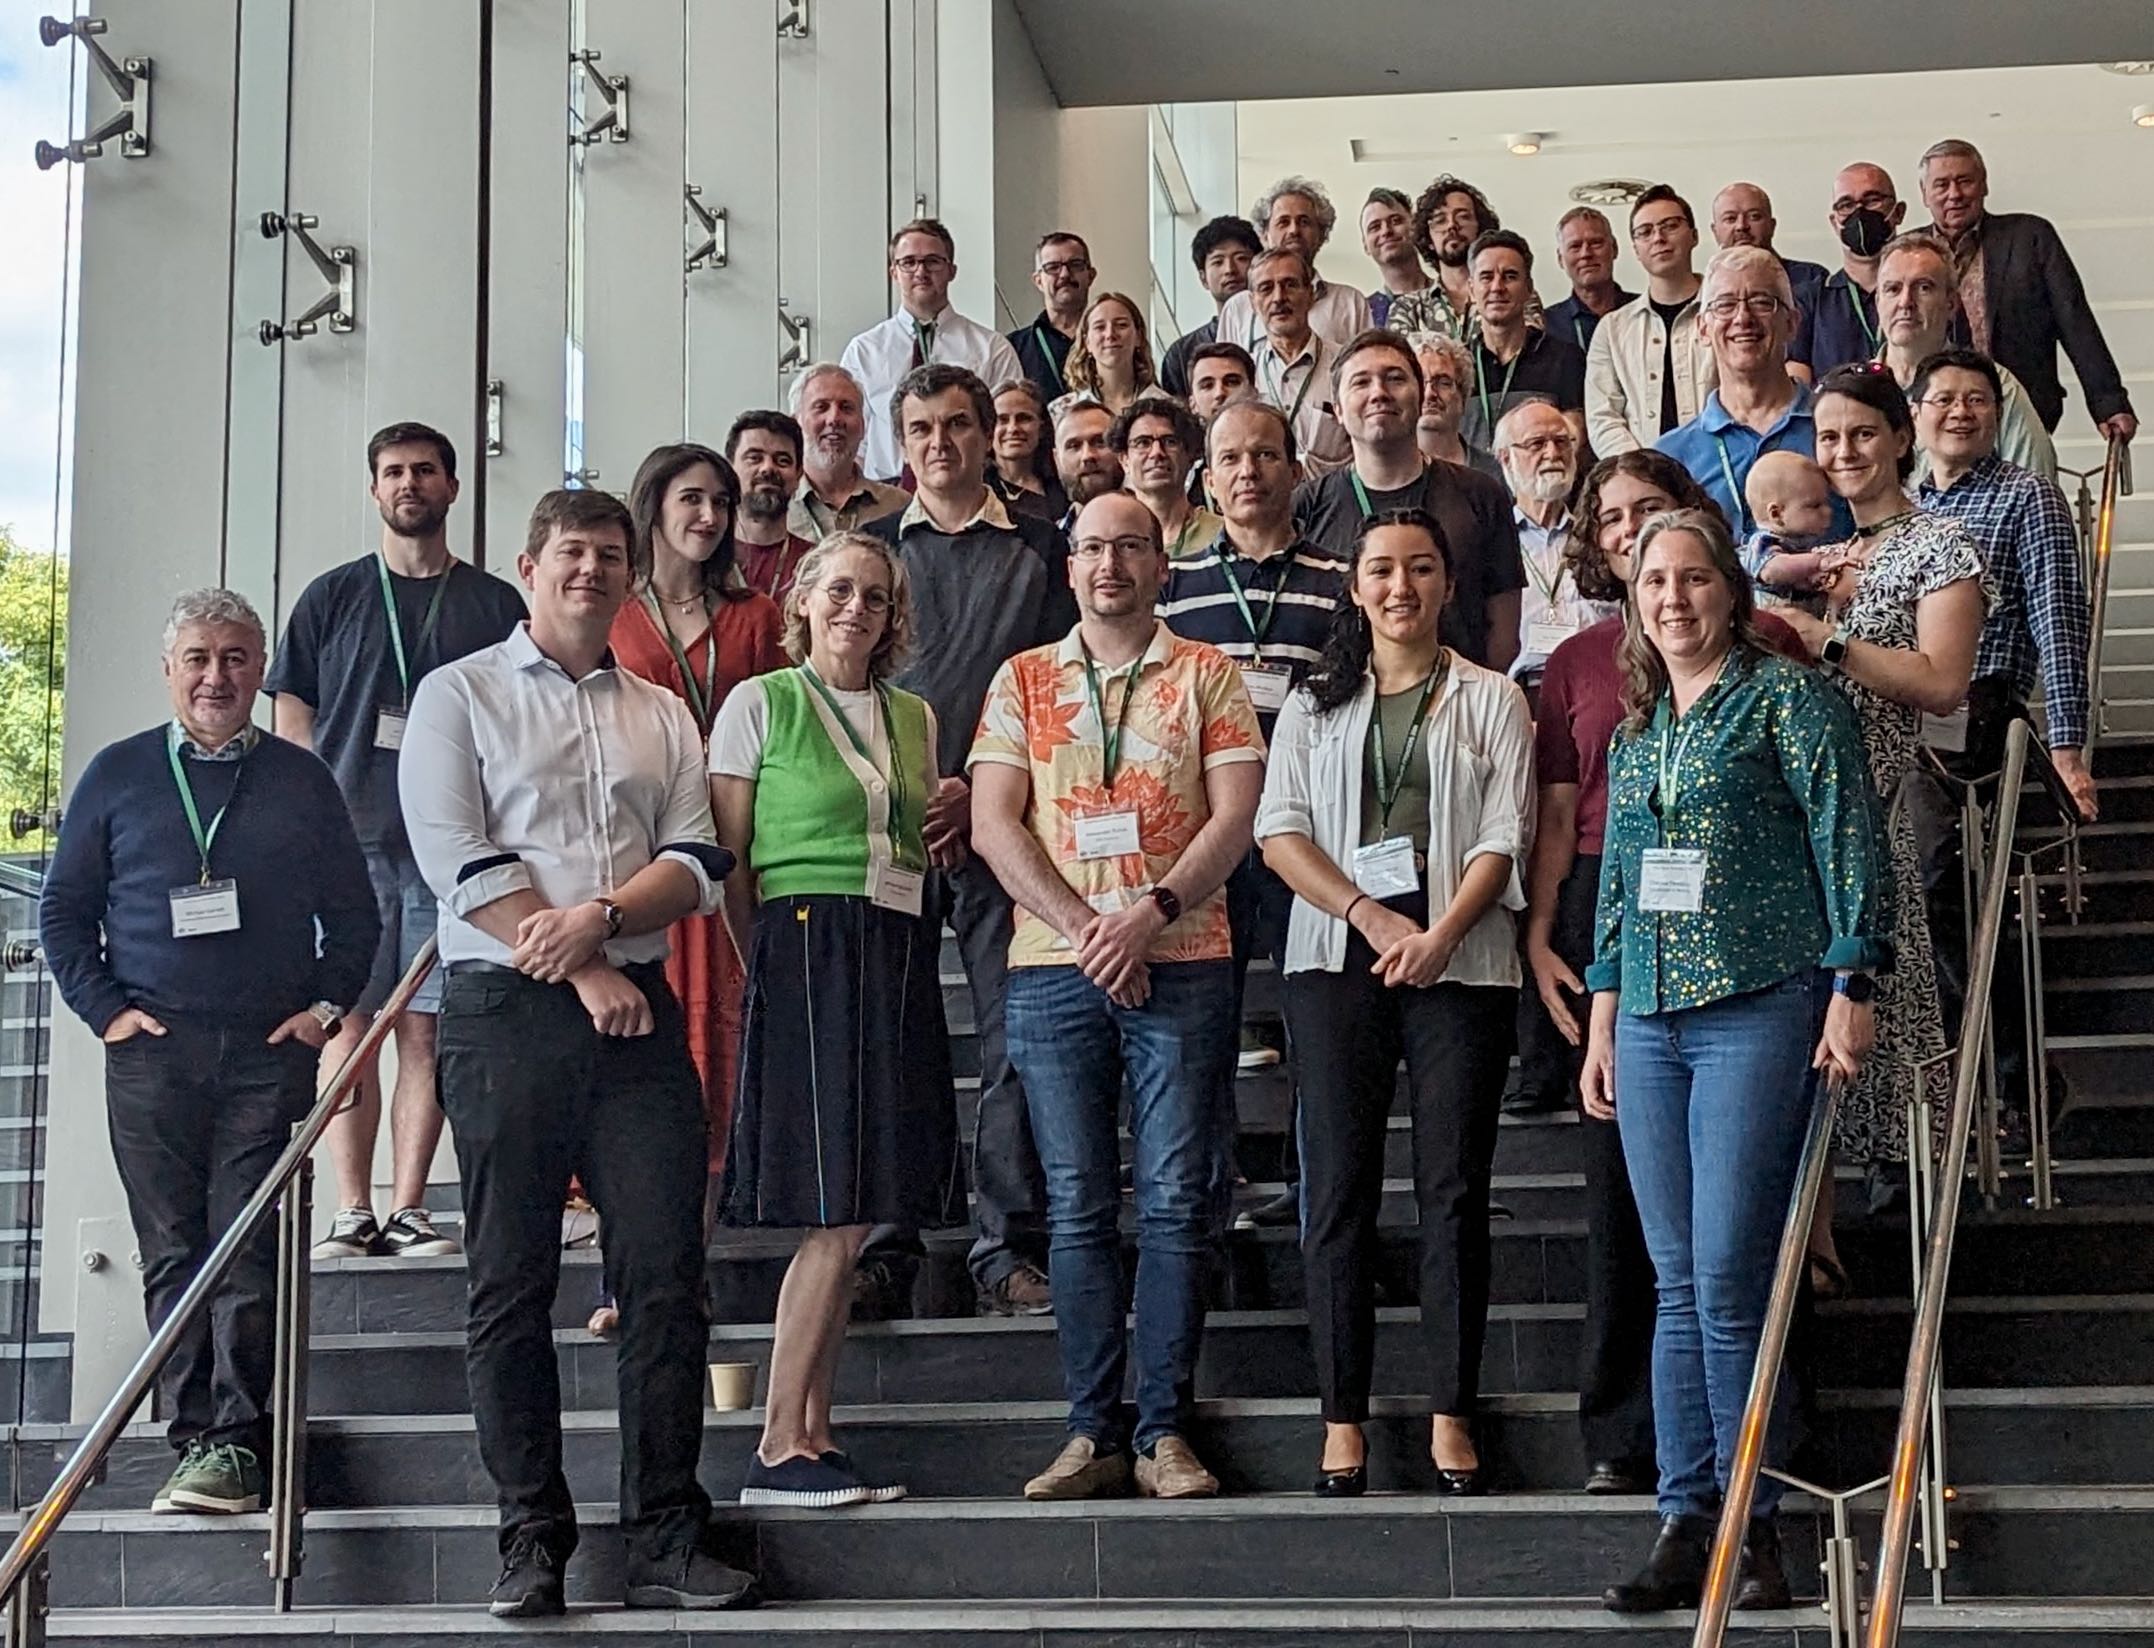 The group photo from the Interstellar Frontiers conference in Perth.